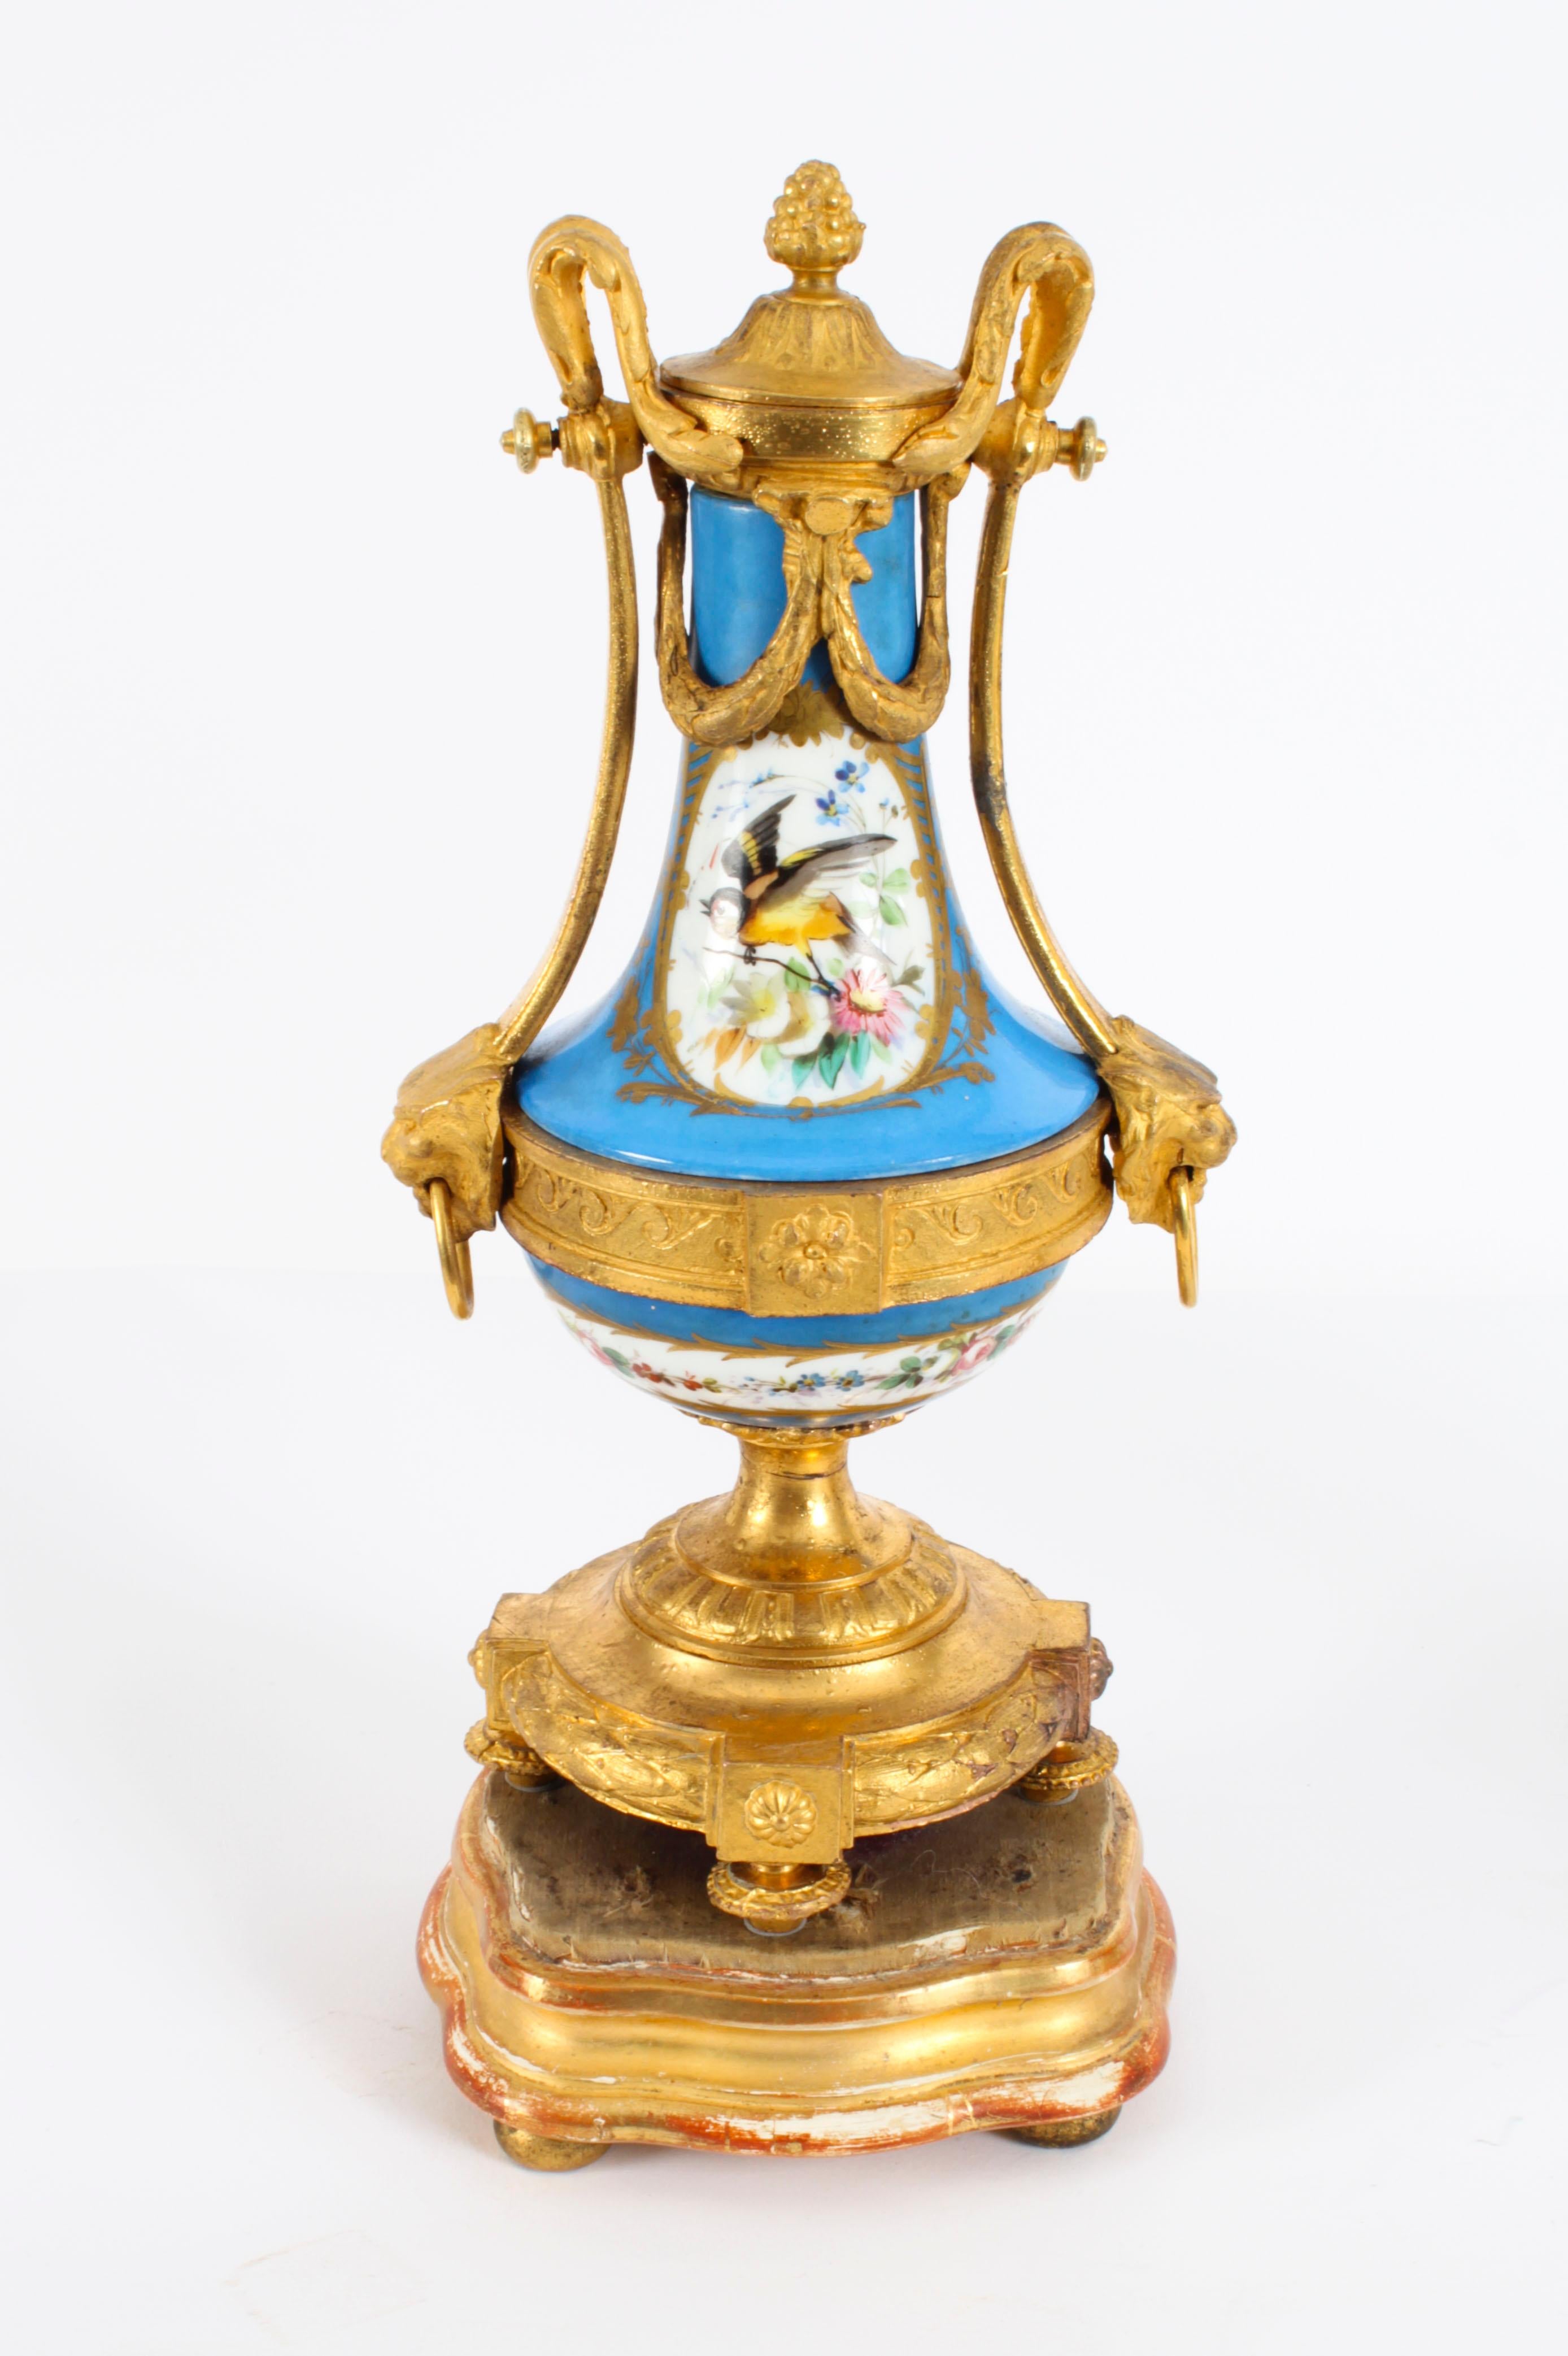 This is a beautiful antique pair of French Sevres style porcelain and ormolu mounted twin handled urns, in the Louis XV manner, Circa 1870 in date.
 
The bleu celeste grounds are superbly decorated with panels of bird in flight on one side with